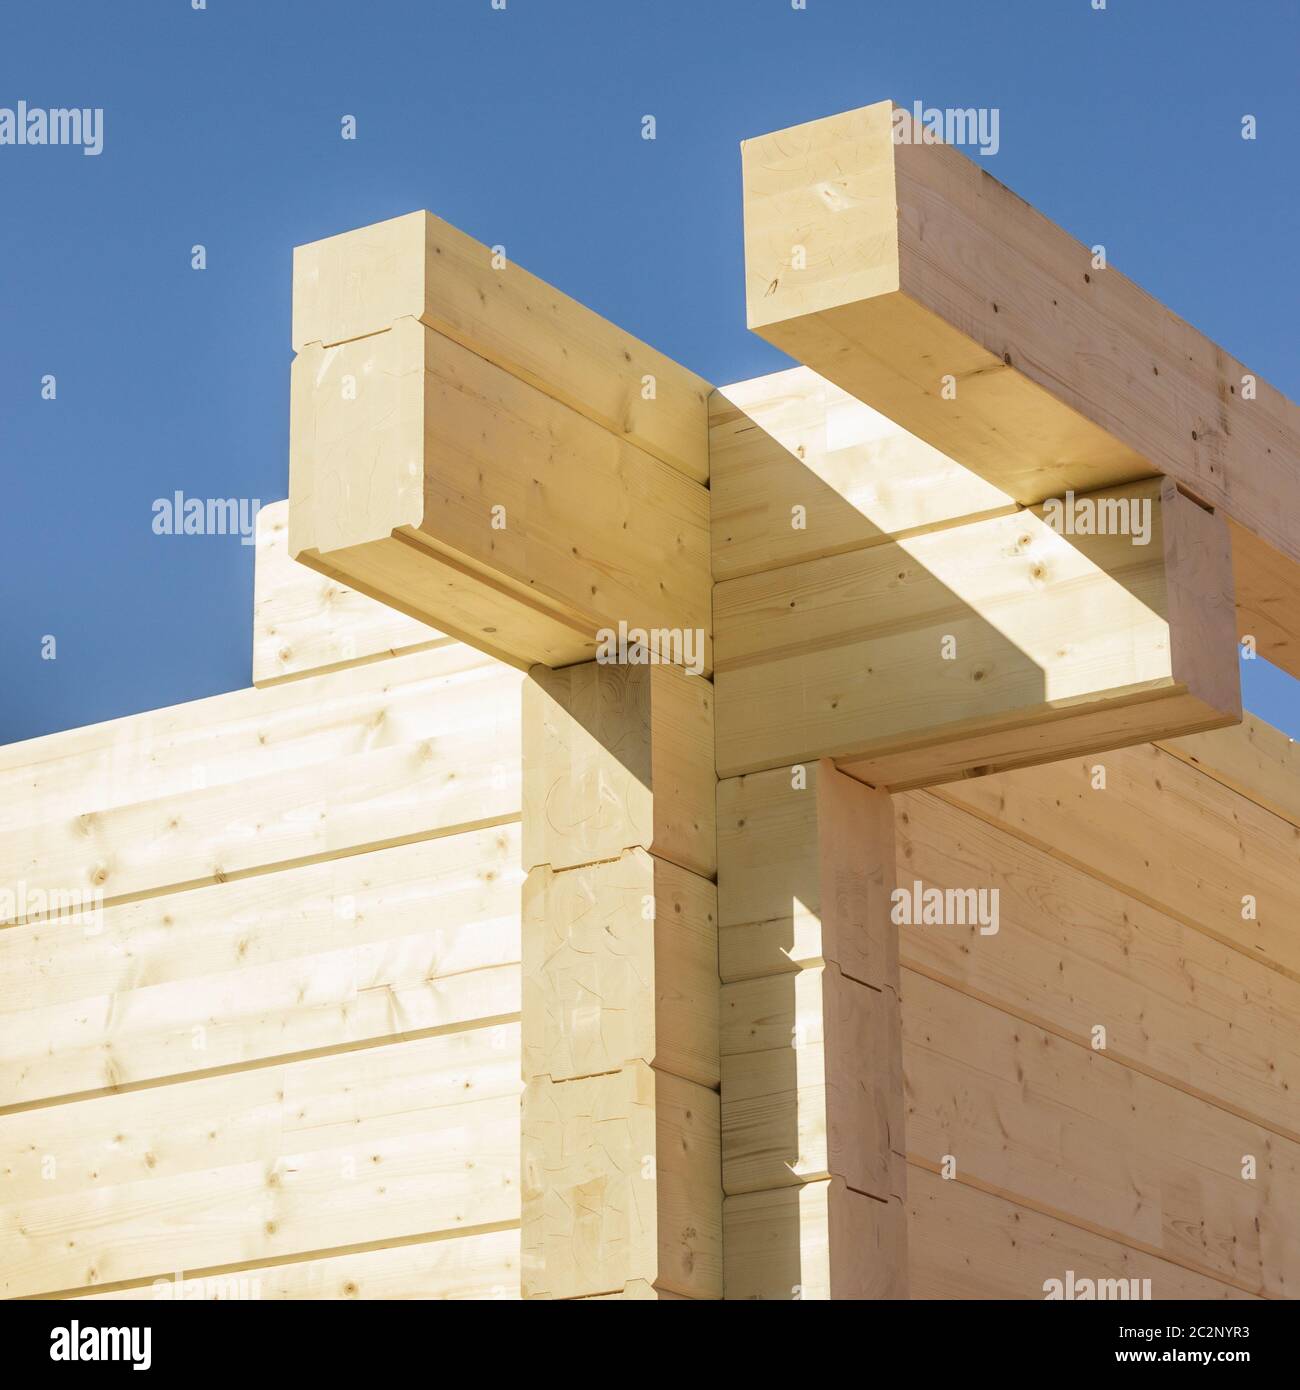 Construction of a building made of glued beams Stock Photo